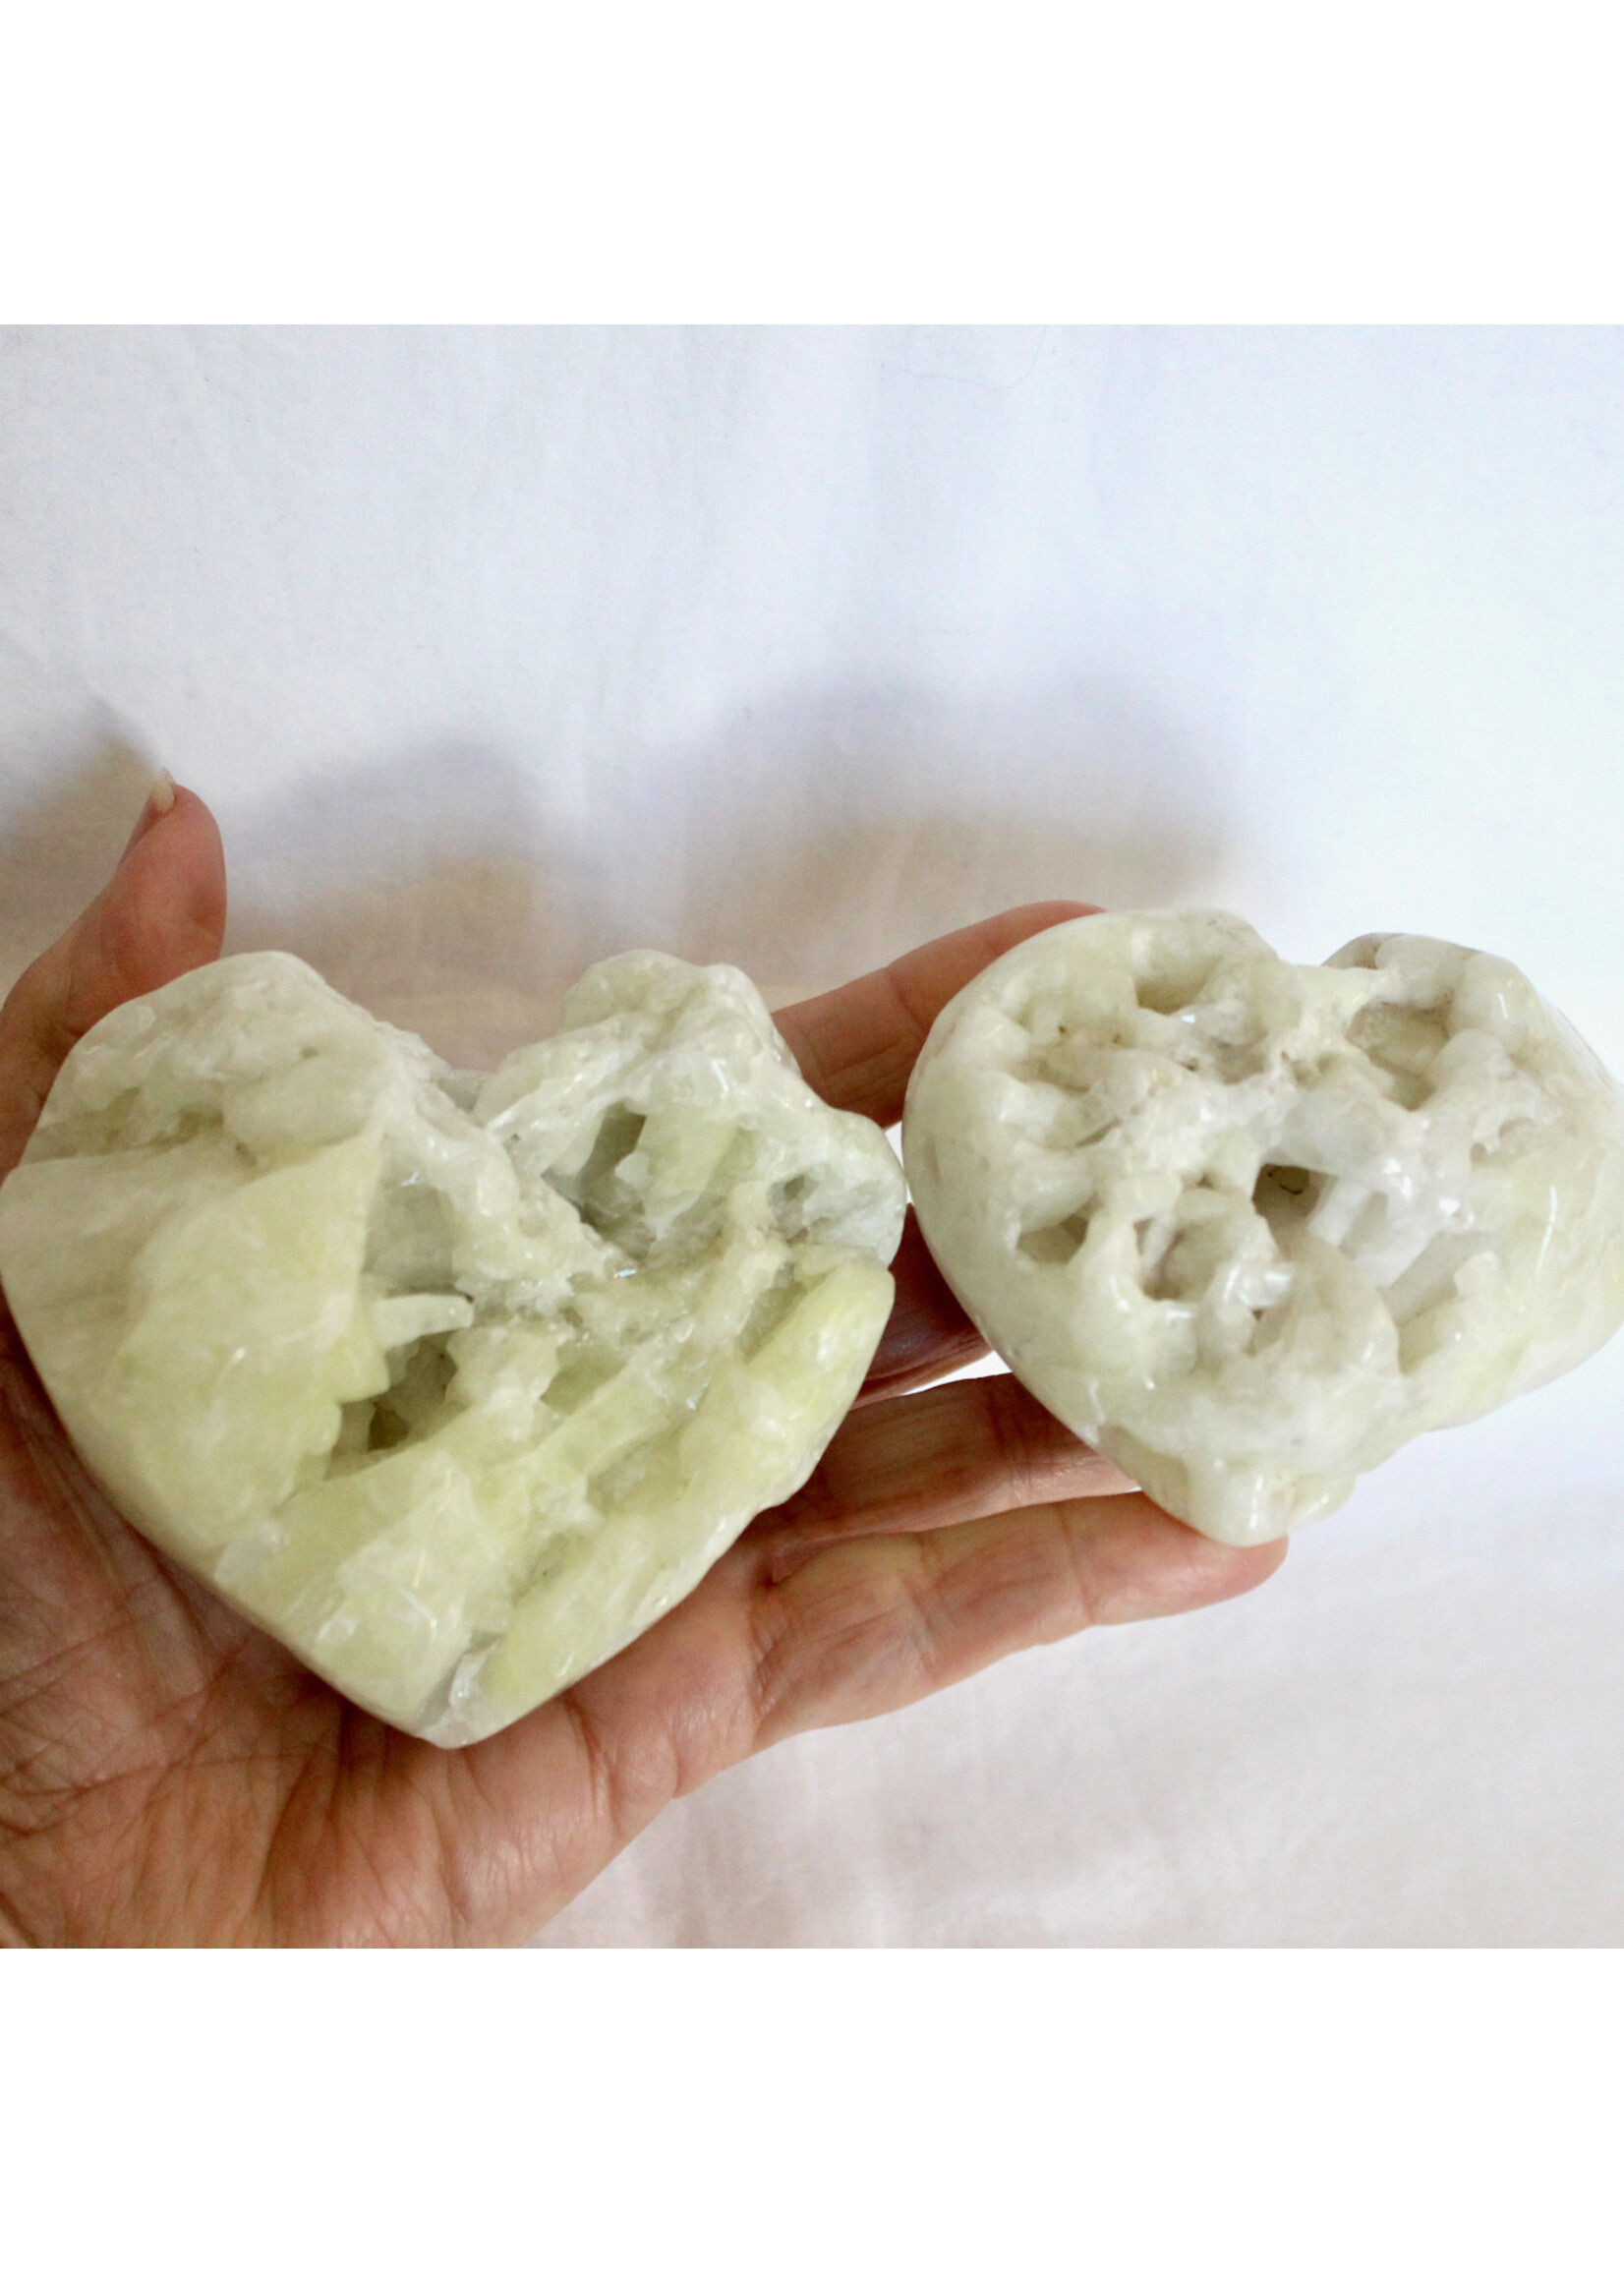 Sulphur In Quartz Hearts for clearing